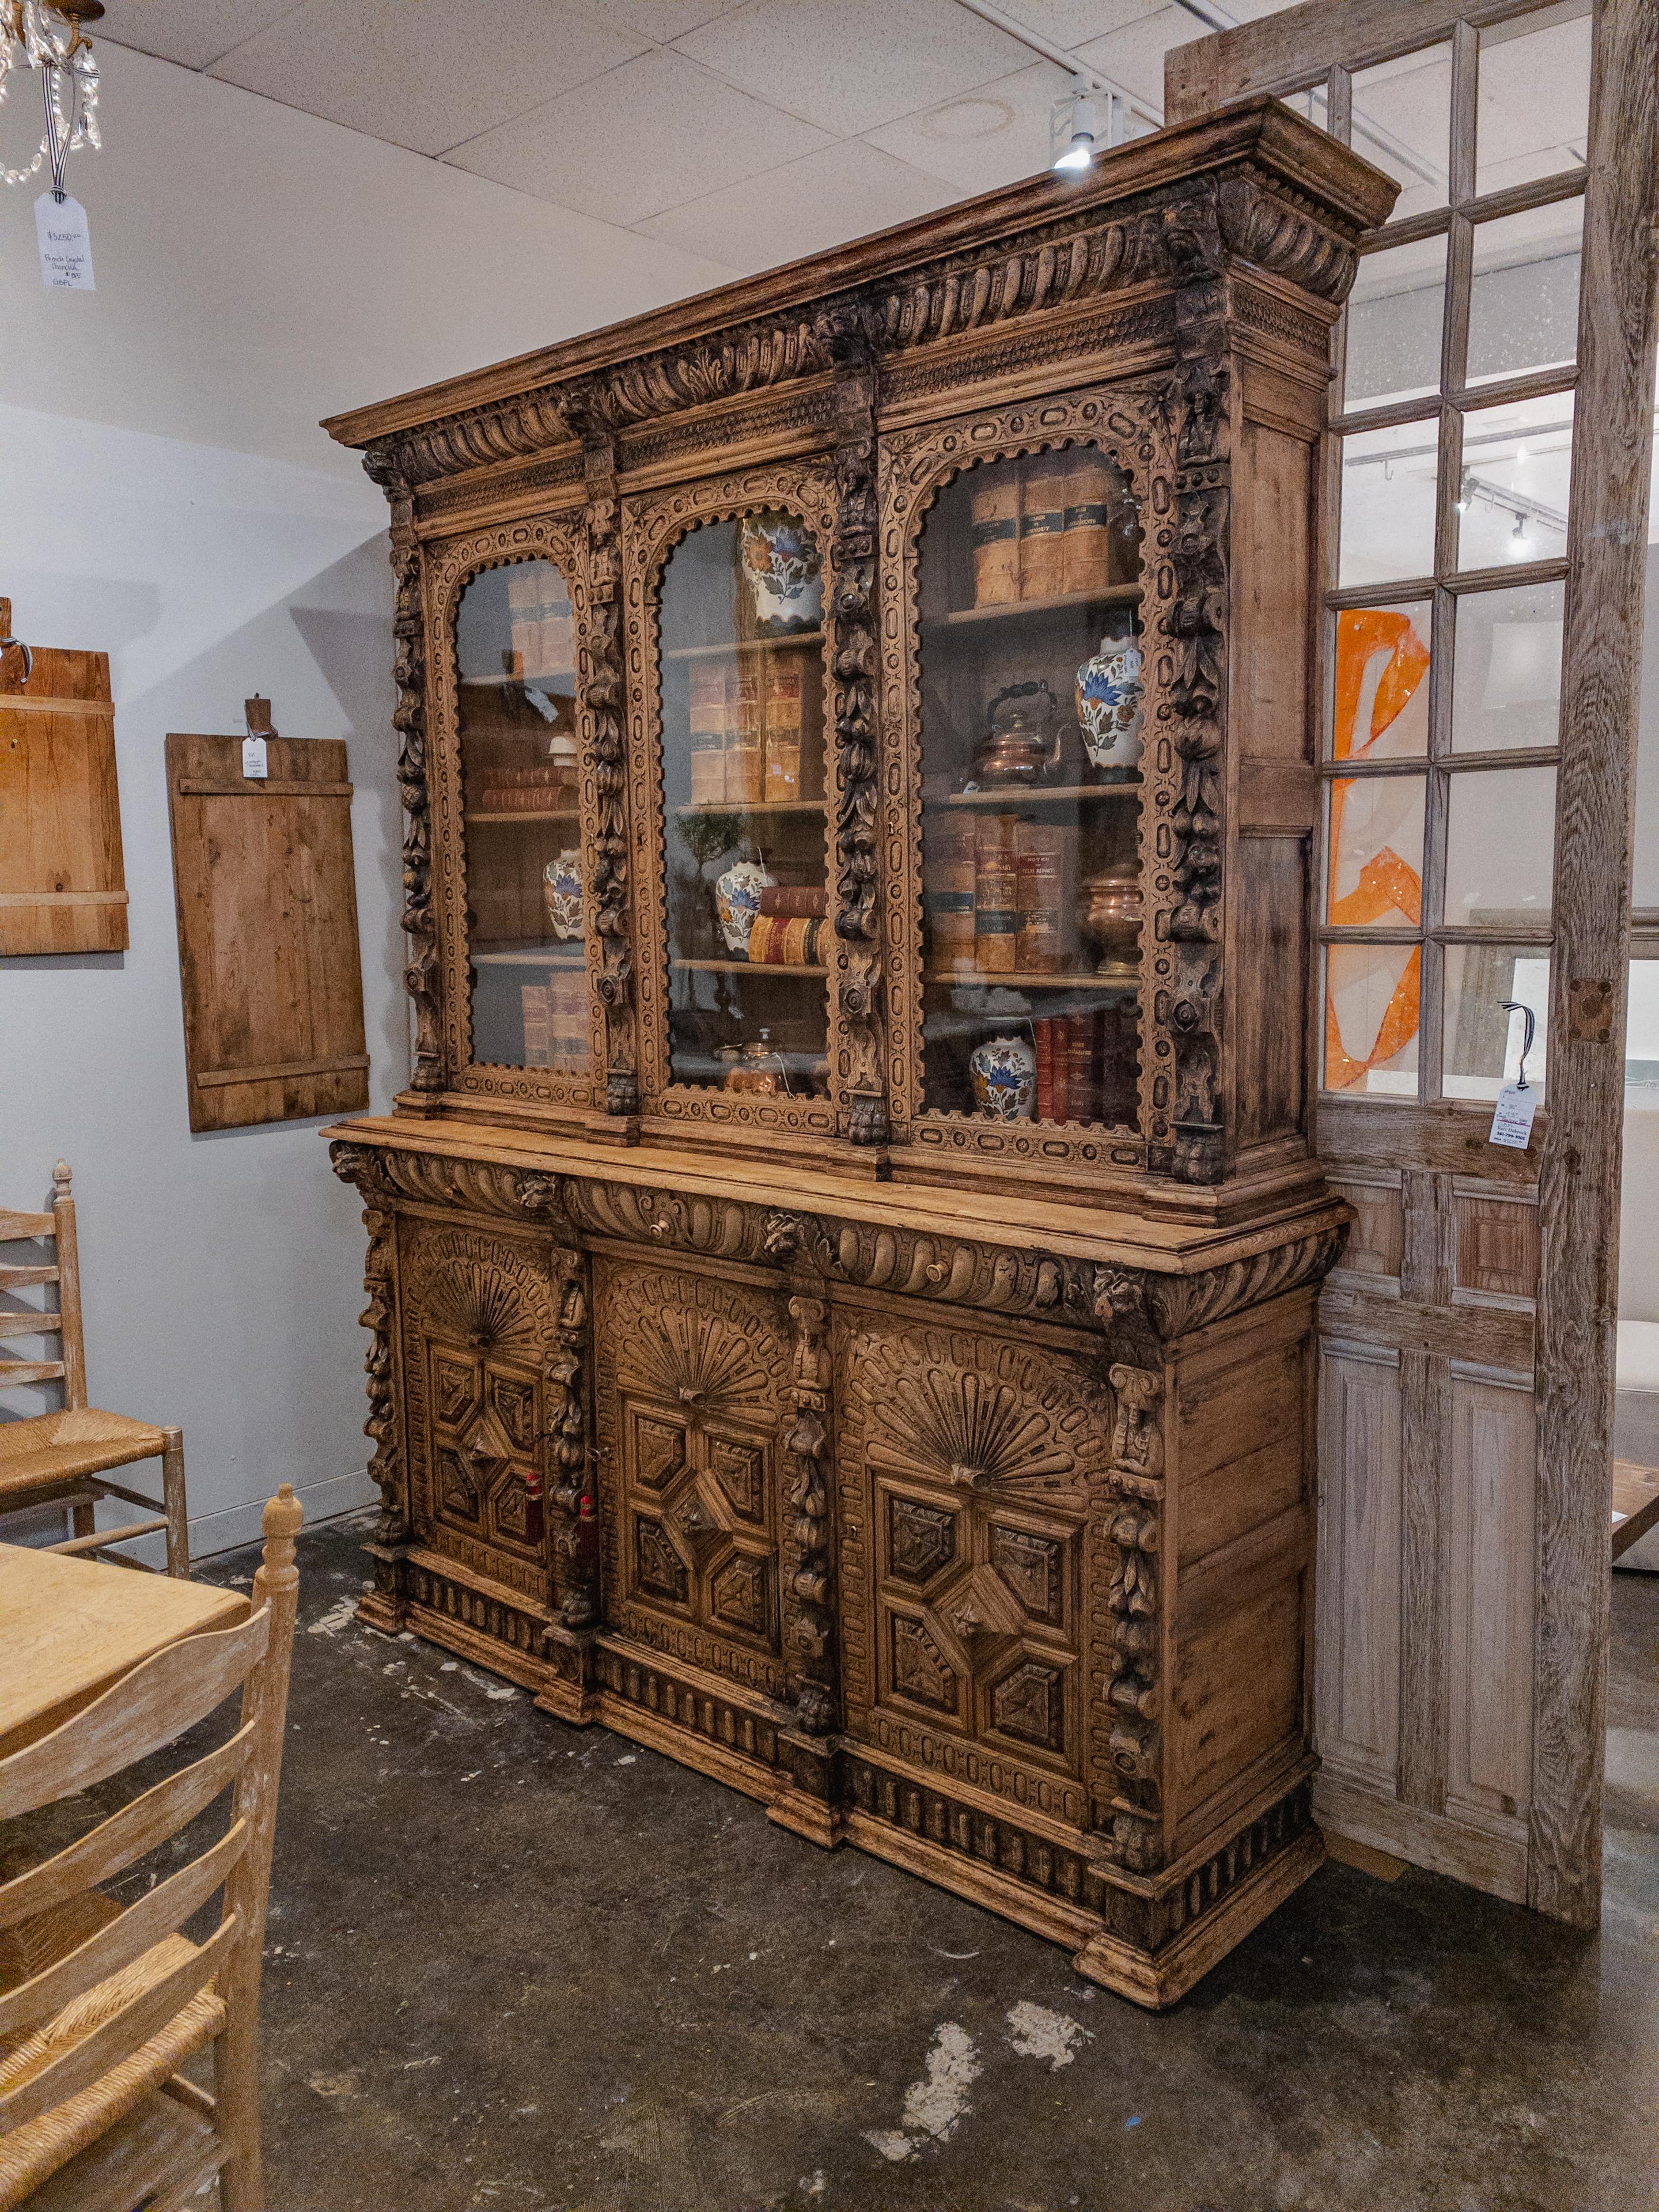 The Antique Carved French Hunt Cabinet is a traditional furniture piece originating from France. It is known for its exquisite craftsmanship and intricate carvings. The cabinet features a sturdy wooden construction with detailed hunting-themed